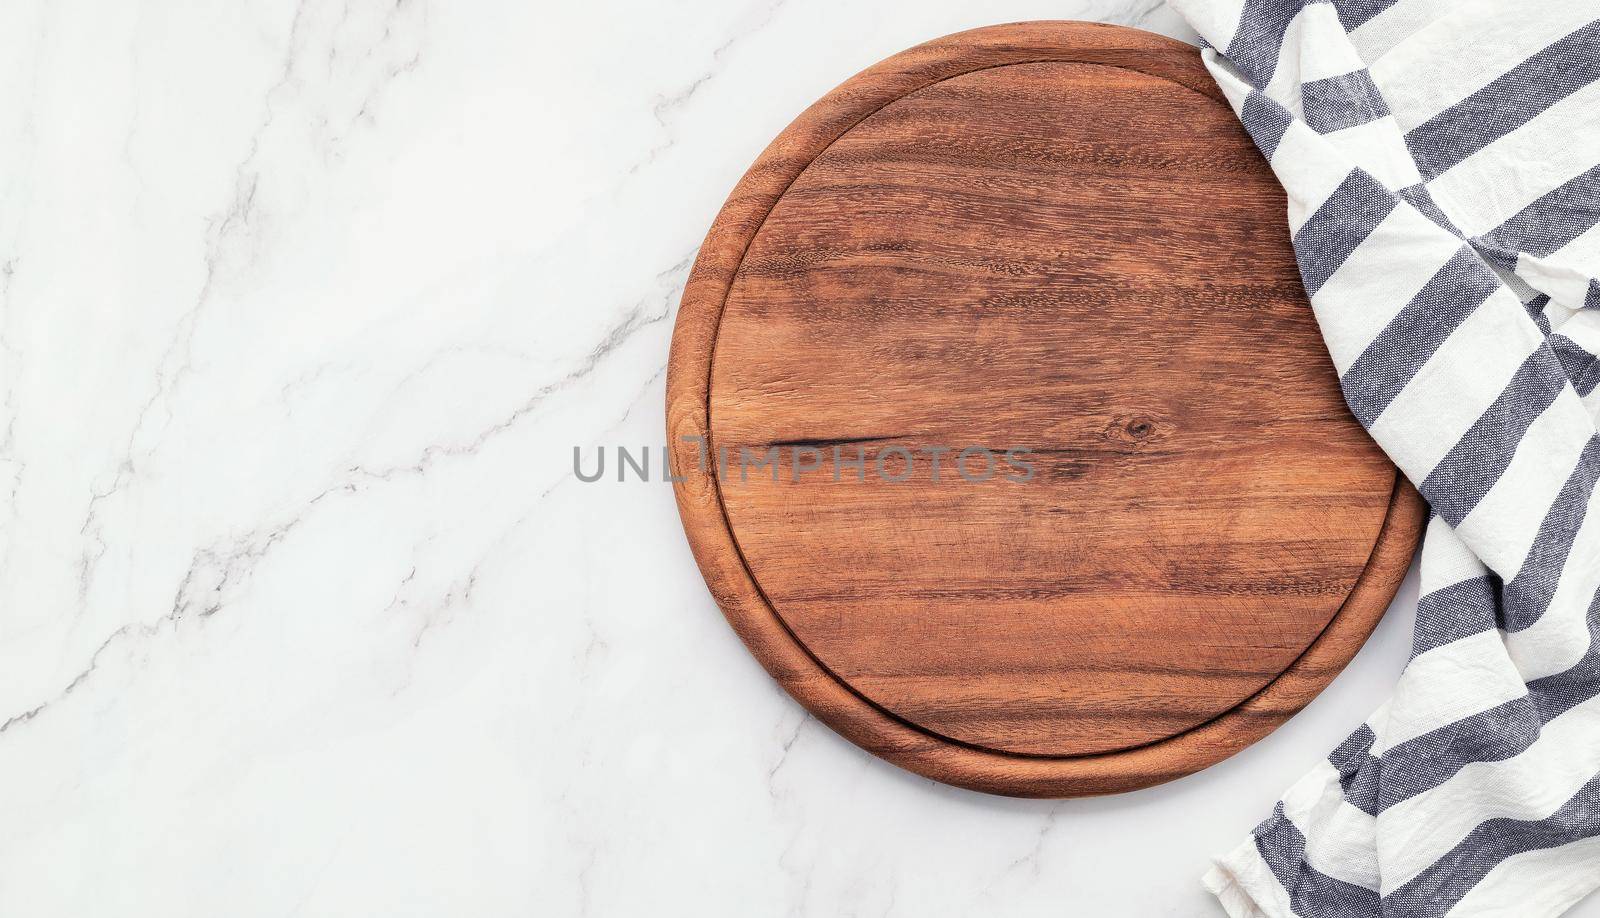 Empty wooden pizza platter with napkin set up on marble stone kitchen table. Pizza board and tablecloth on white marble background.